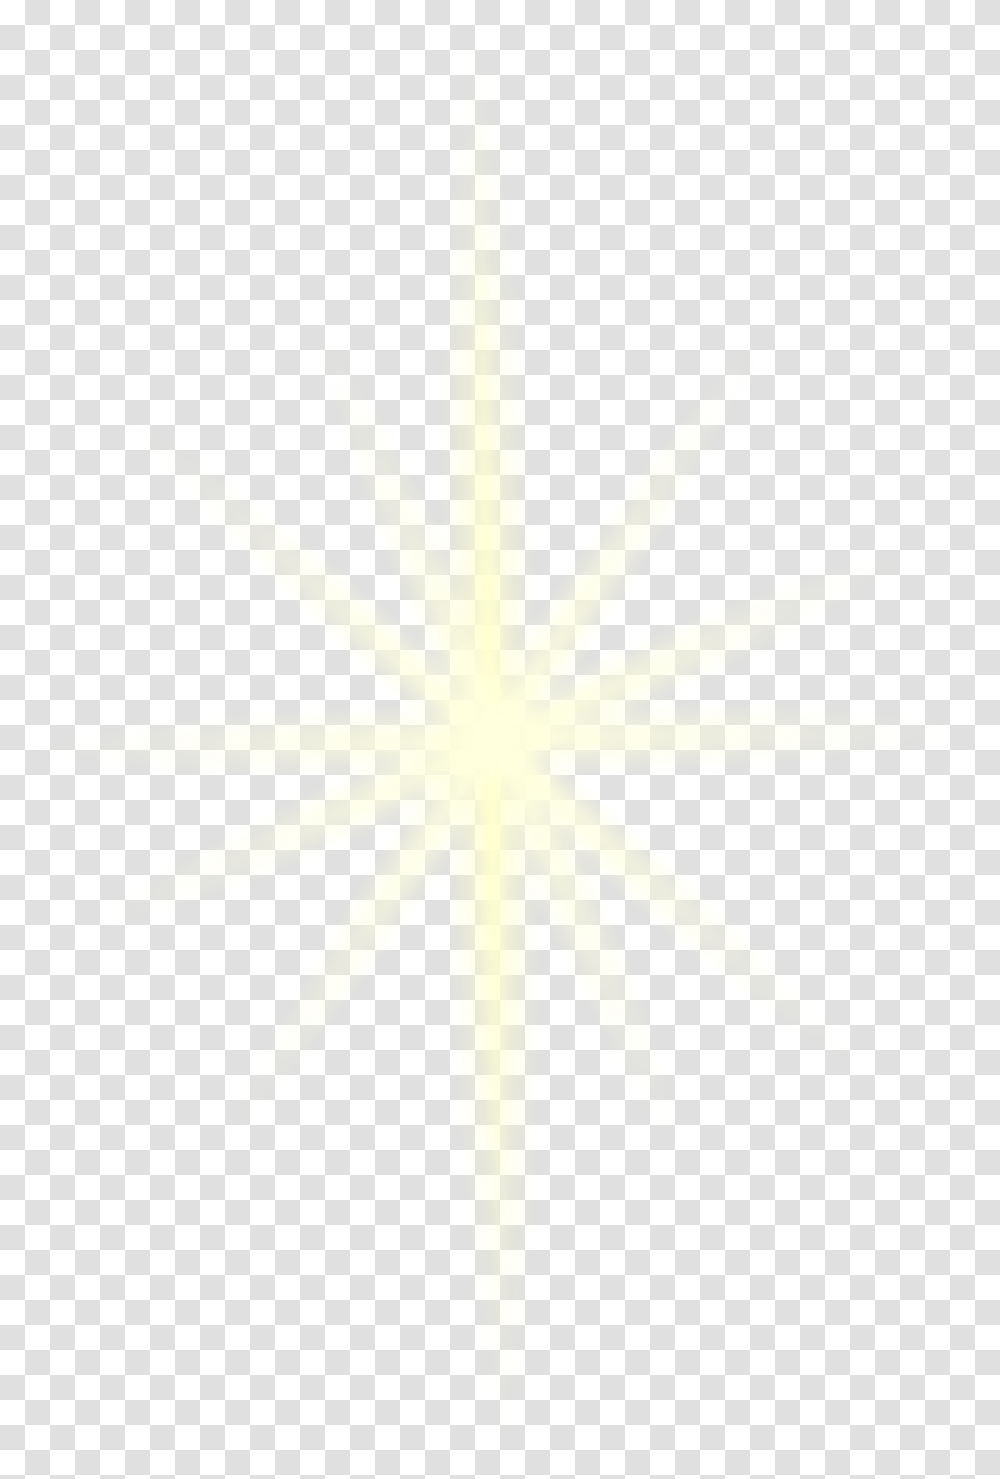 Library Of Yellow Light Effect Graphic Royalty Free Download Cross, Symbol, Leaf, Plant, Star Symbol Transparent Png